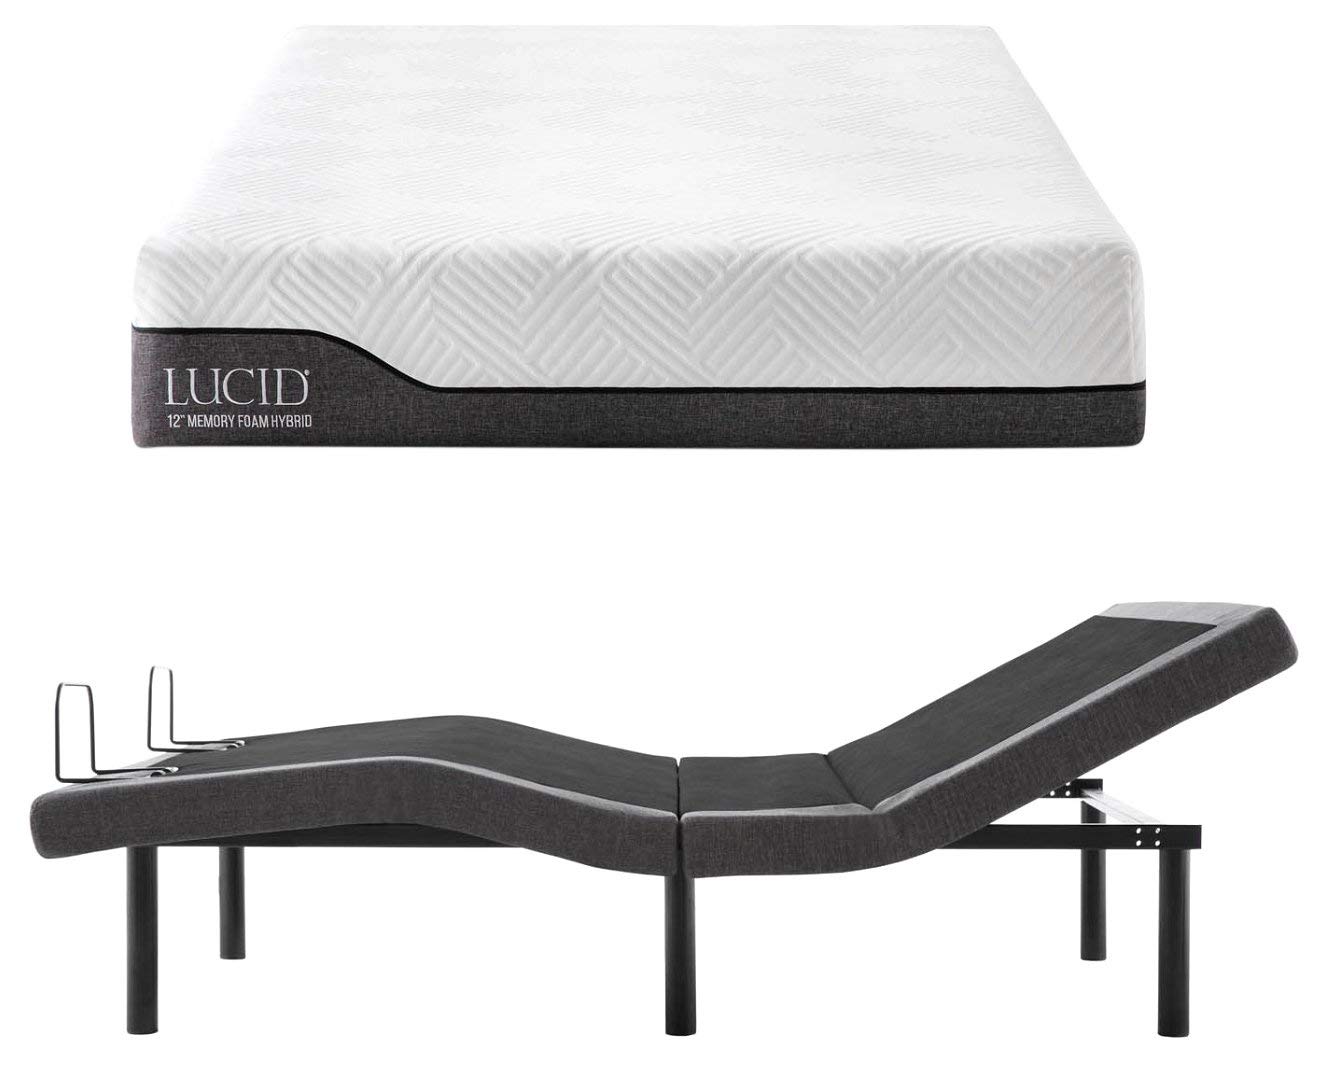 LUCID L300 Adjustable Bed Base with 12 Inch Memory Foam Hybrid mattress